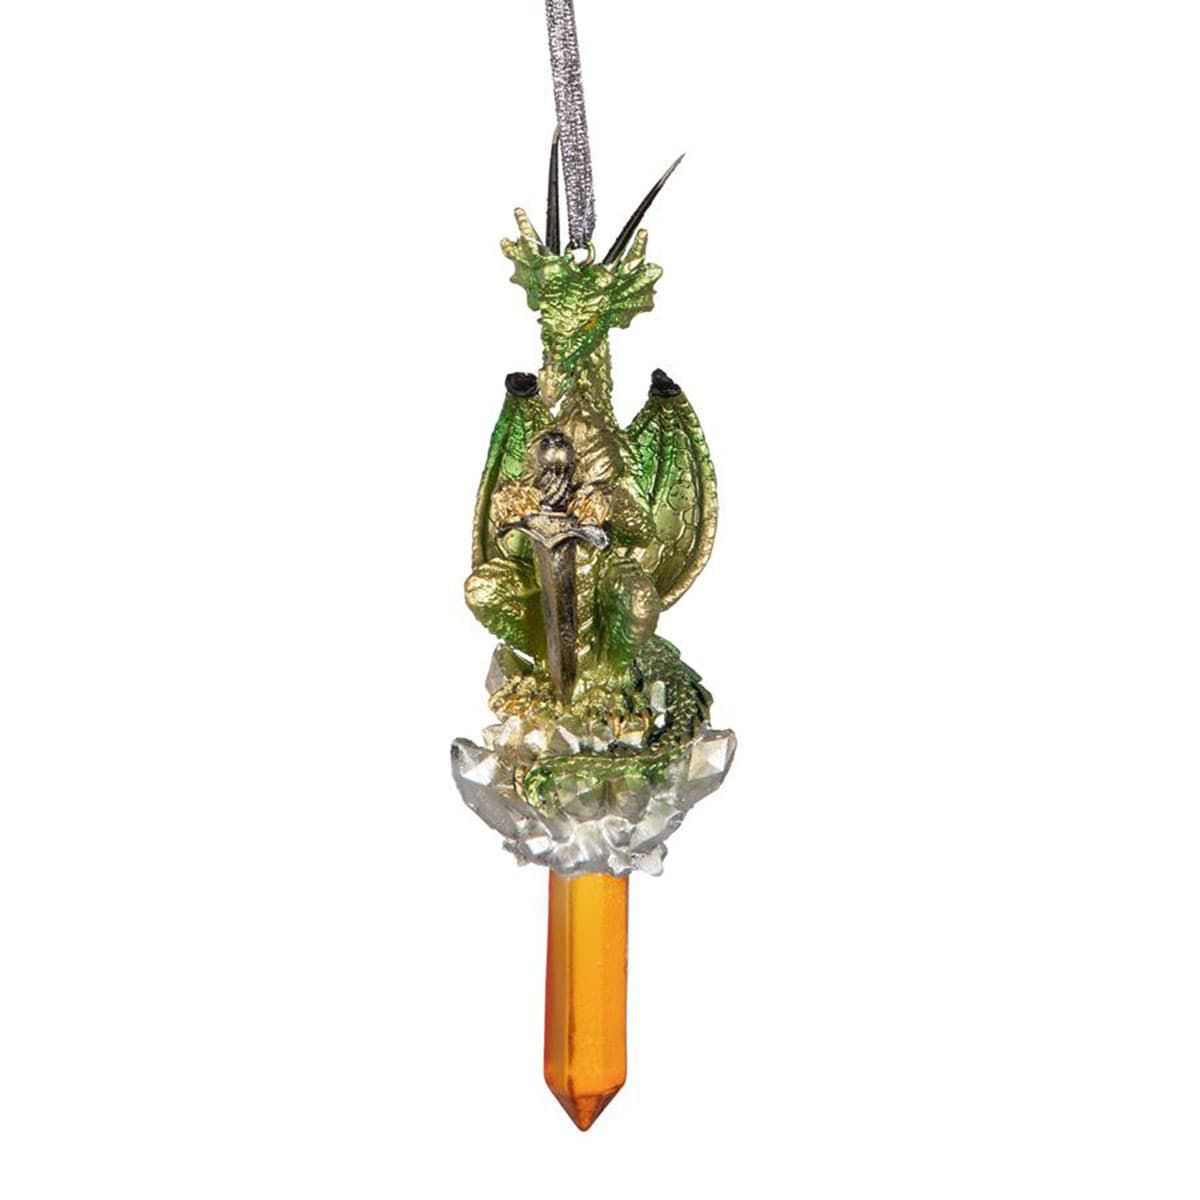 Cicles Gothic Dragon Resin Holiday Ornament hand-painted in metallics with silver cord hanger